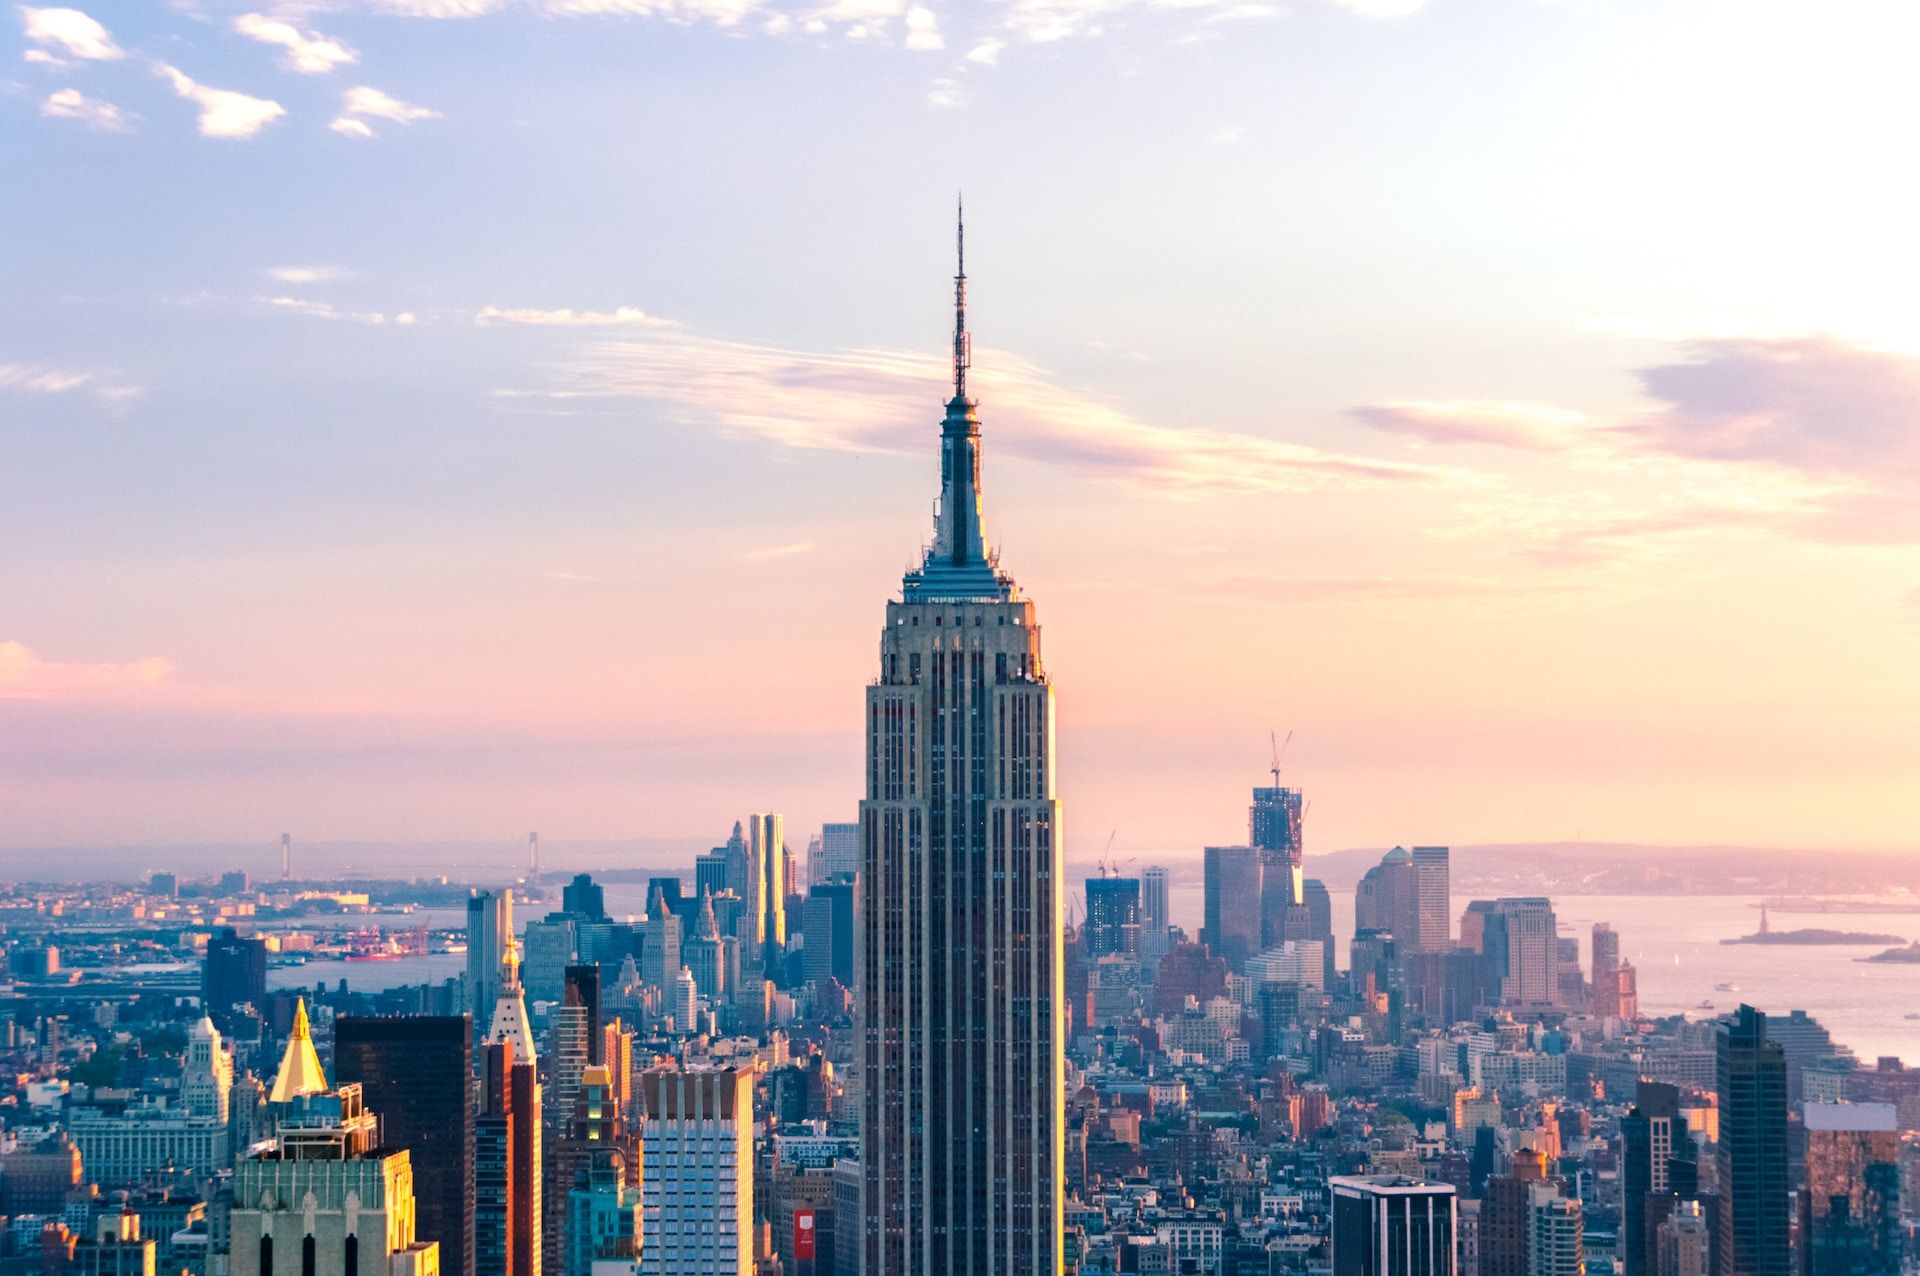 View of the Empire State Building in the New York City skyline